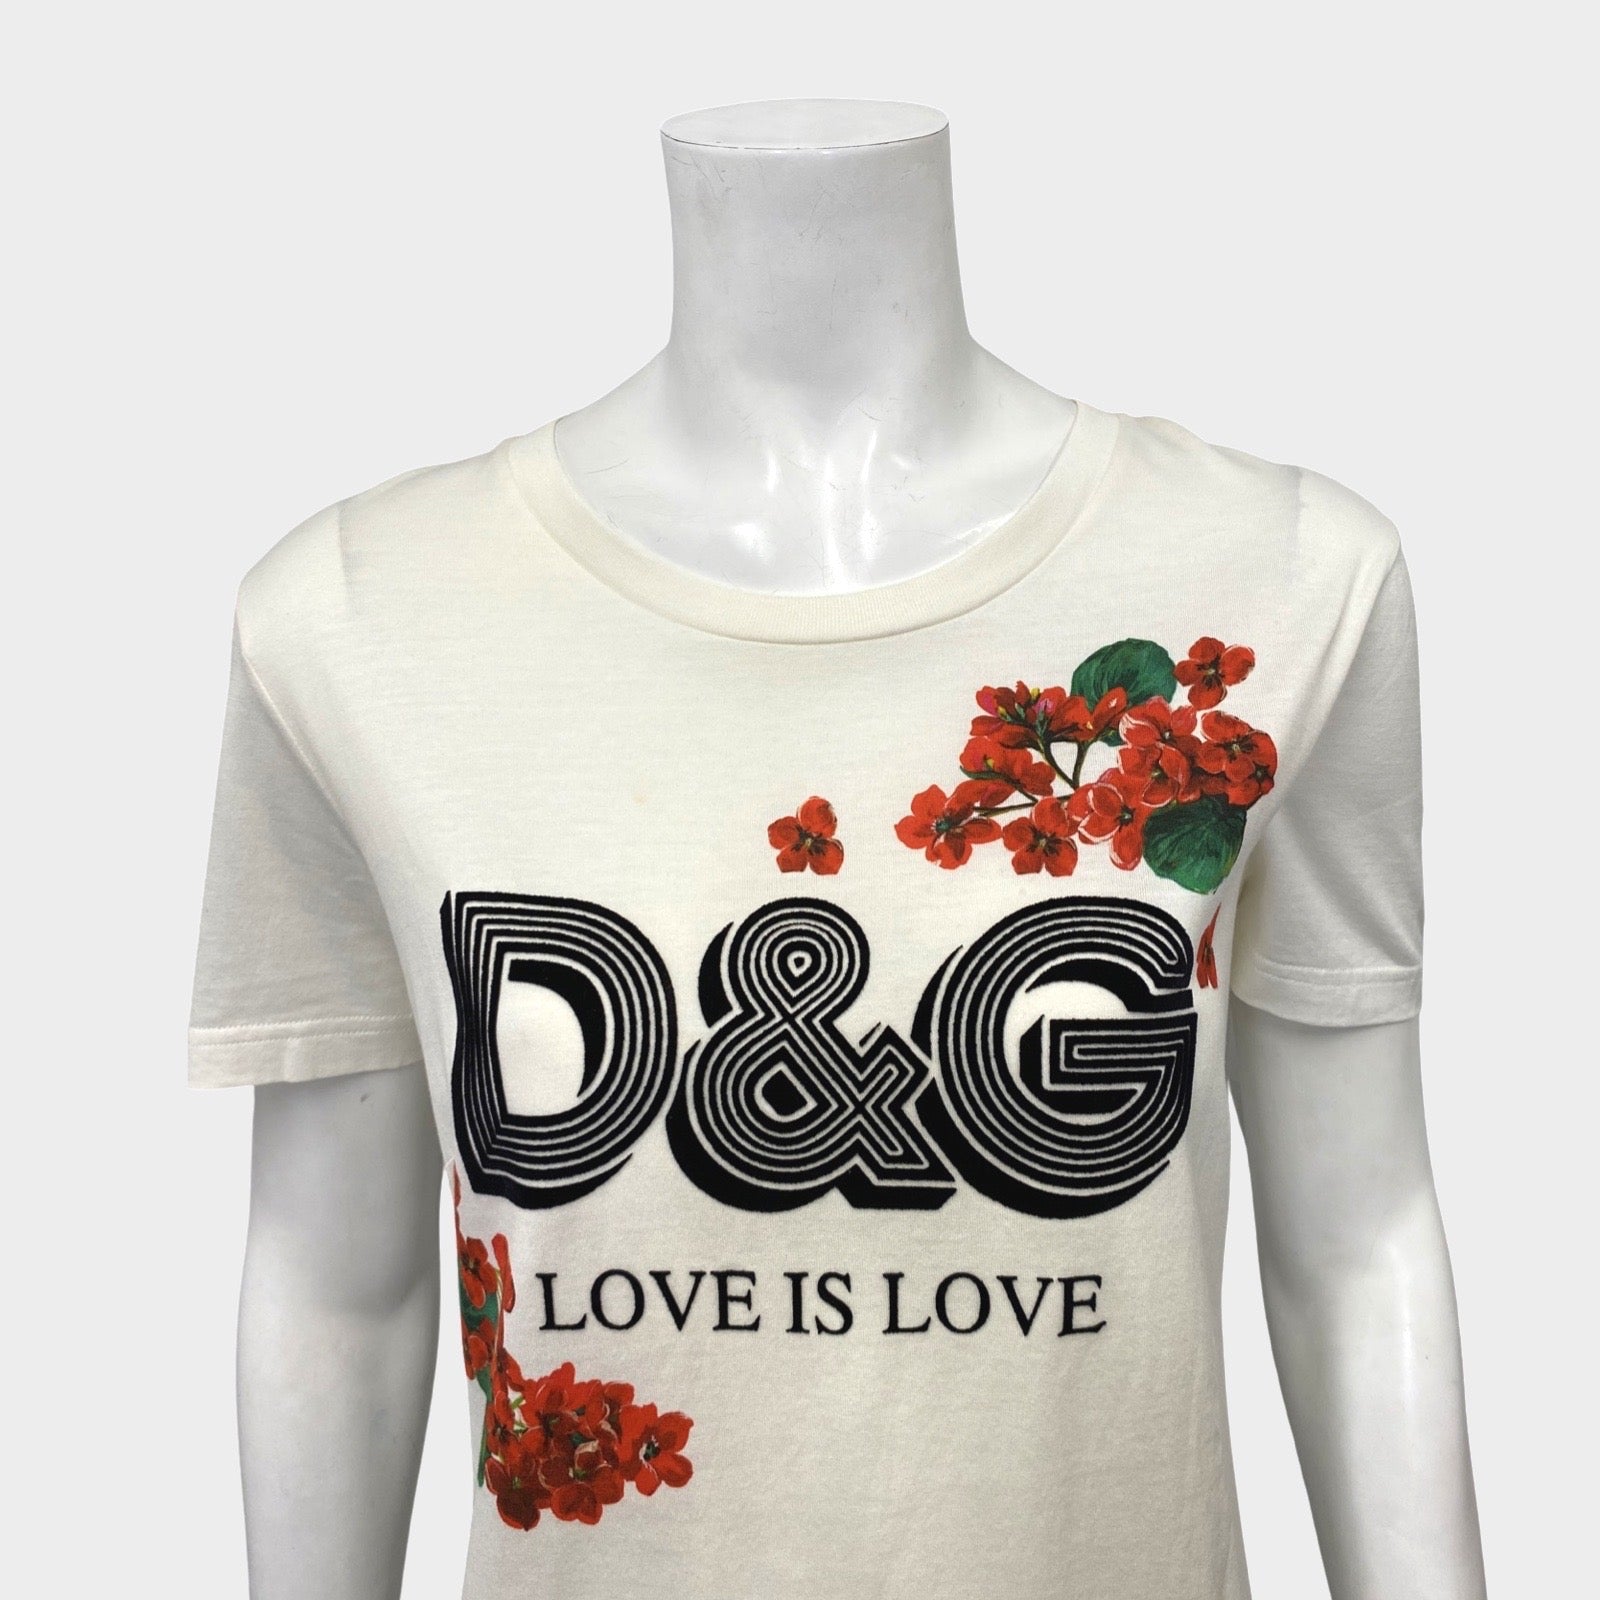 Dolce&Gabbana women's white 'love is love' t-shirt with logo and